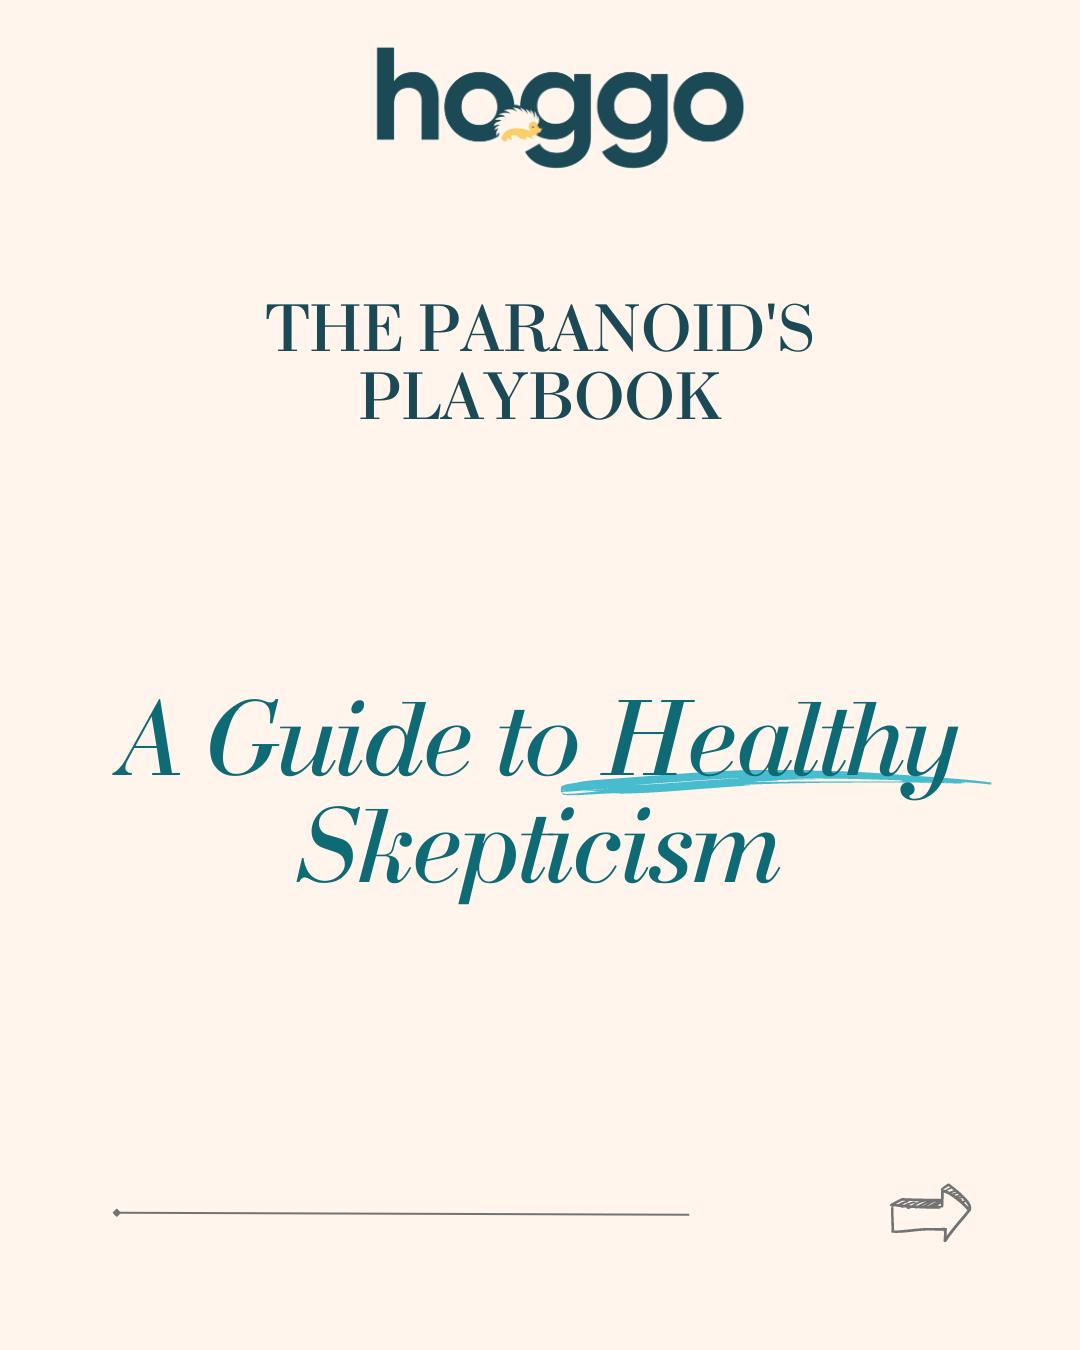 A Guide to Healthy Skepticism